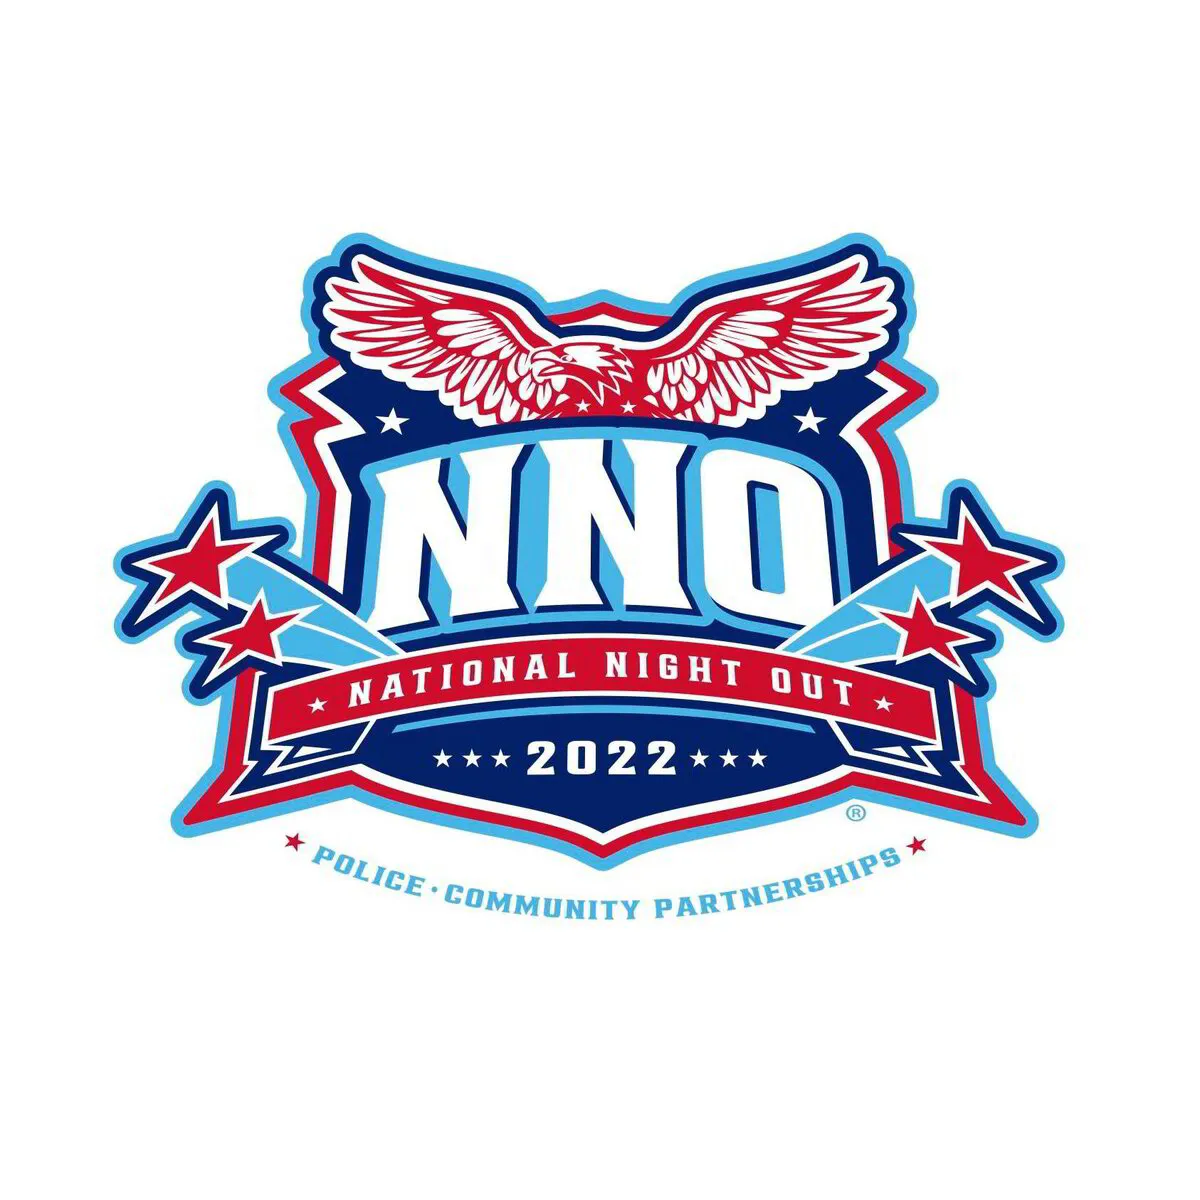 Save the Date! National Night Out is happening Aug 2, 2022!